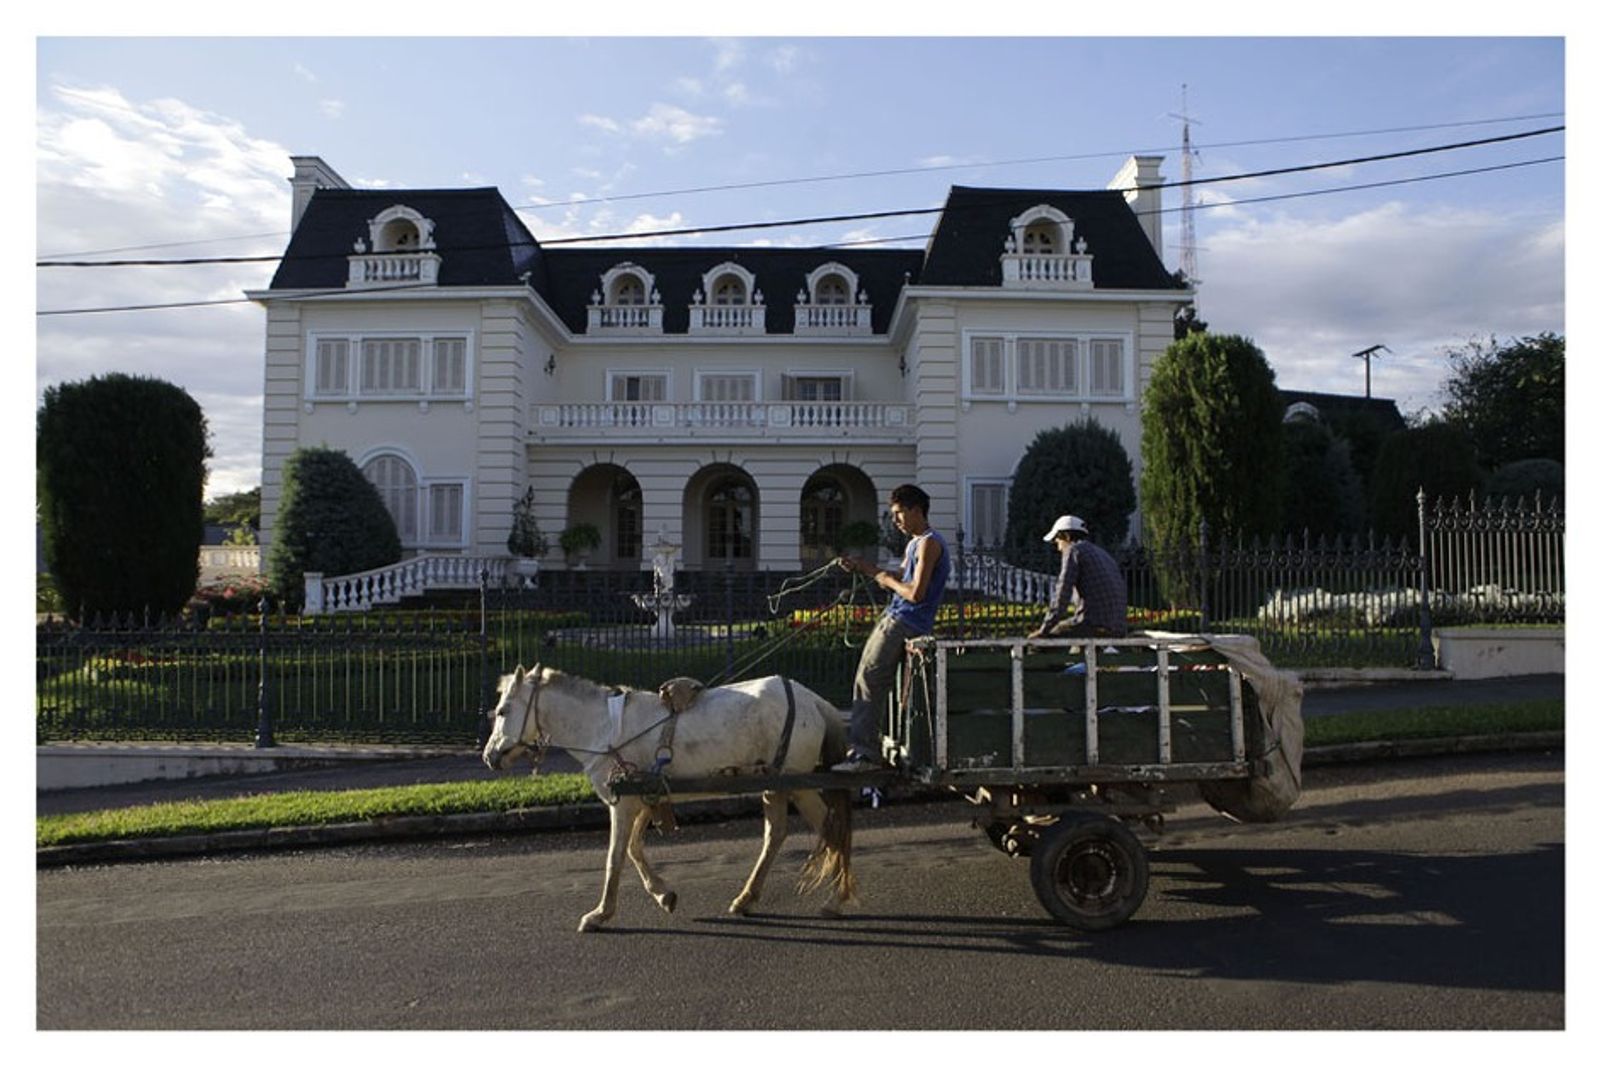 © Jorge Saenz - Recycling workers drives a horse-cart by a residential town of Asuncion, Paraguay, June 6, 2012. (Jorge Saenz)